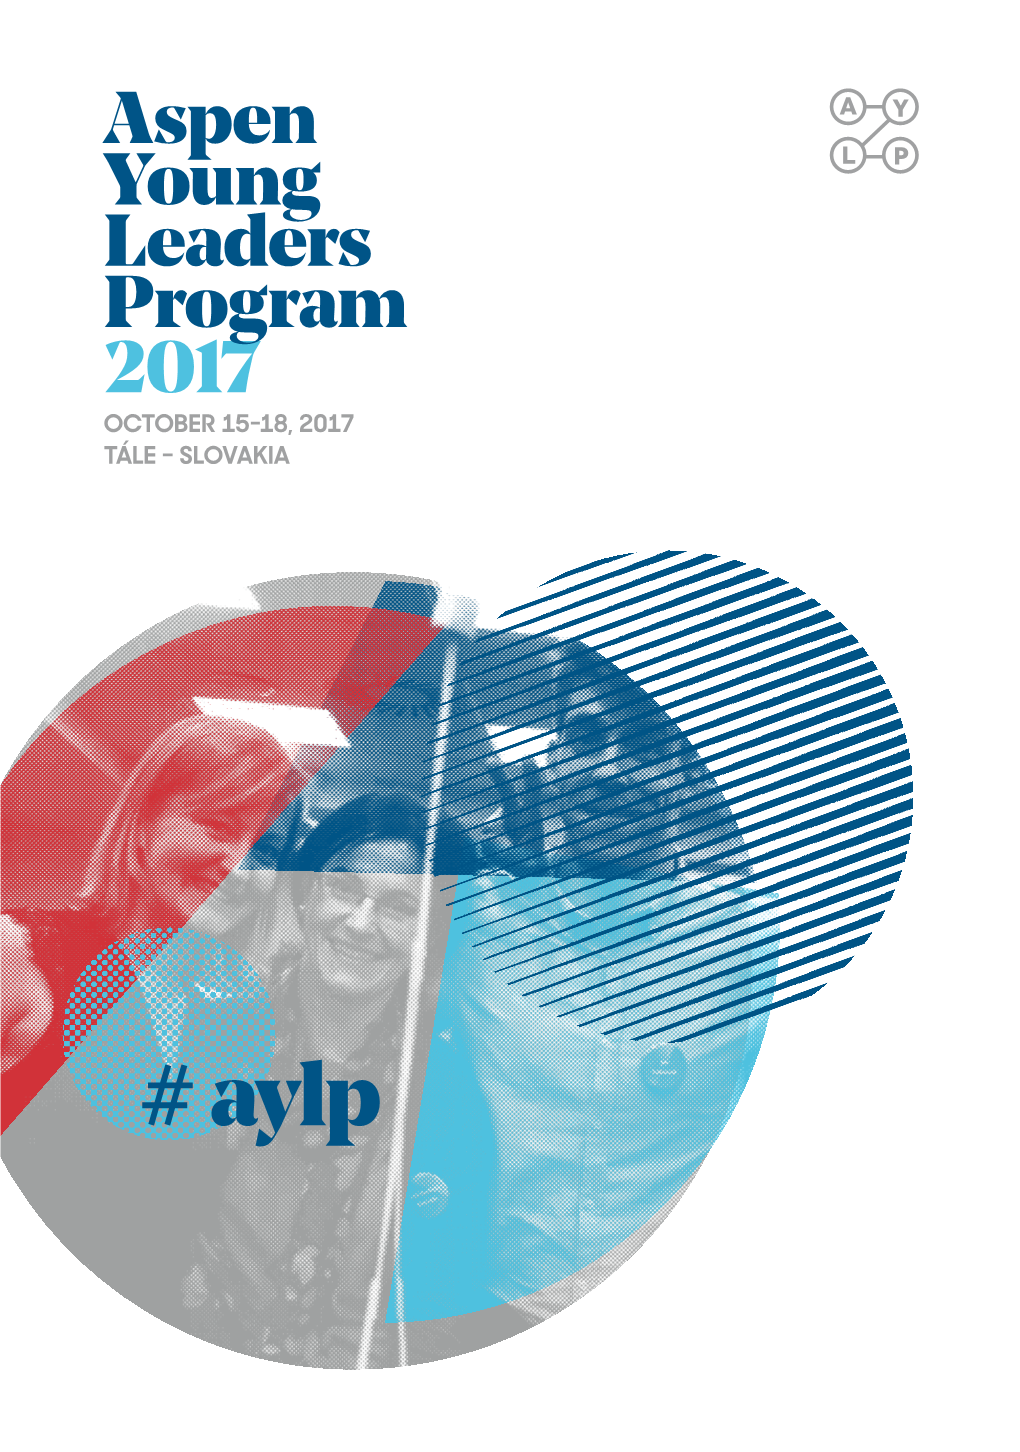 2017 Aspen Young Leaders Program 2017 5 Tuesday October 17 Wednesday October 18